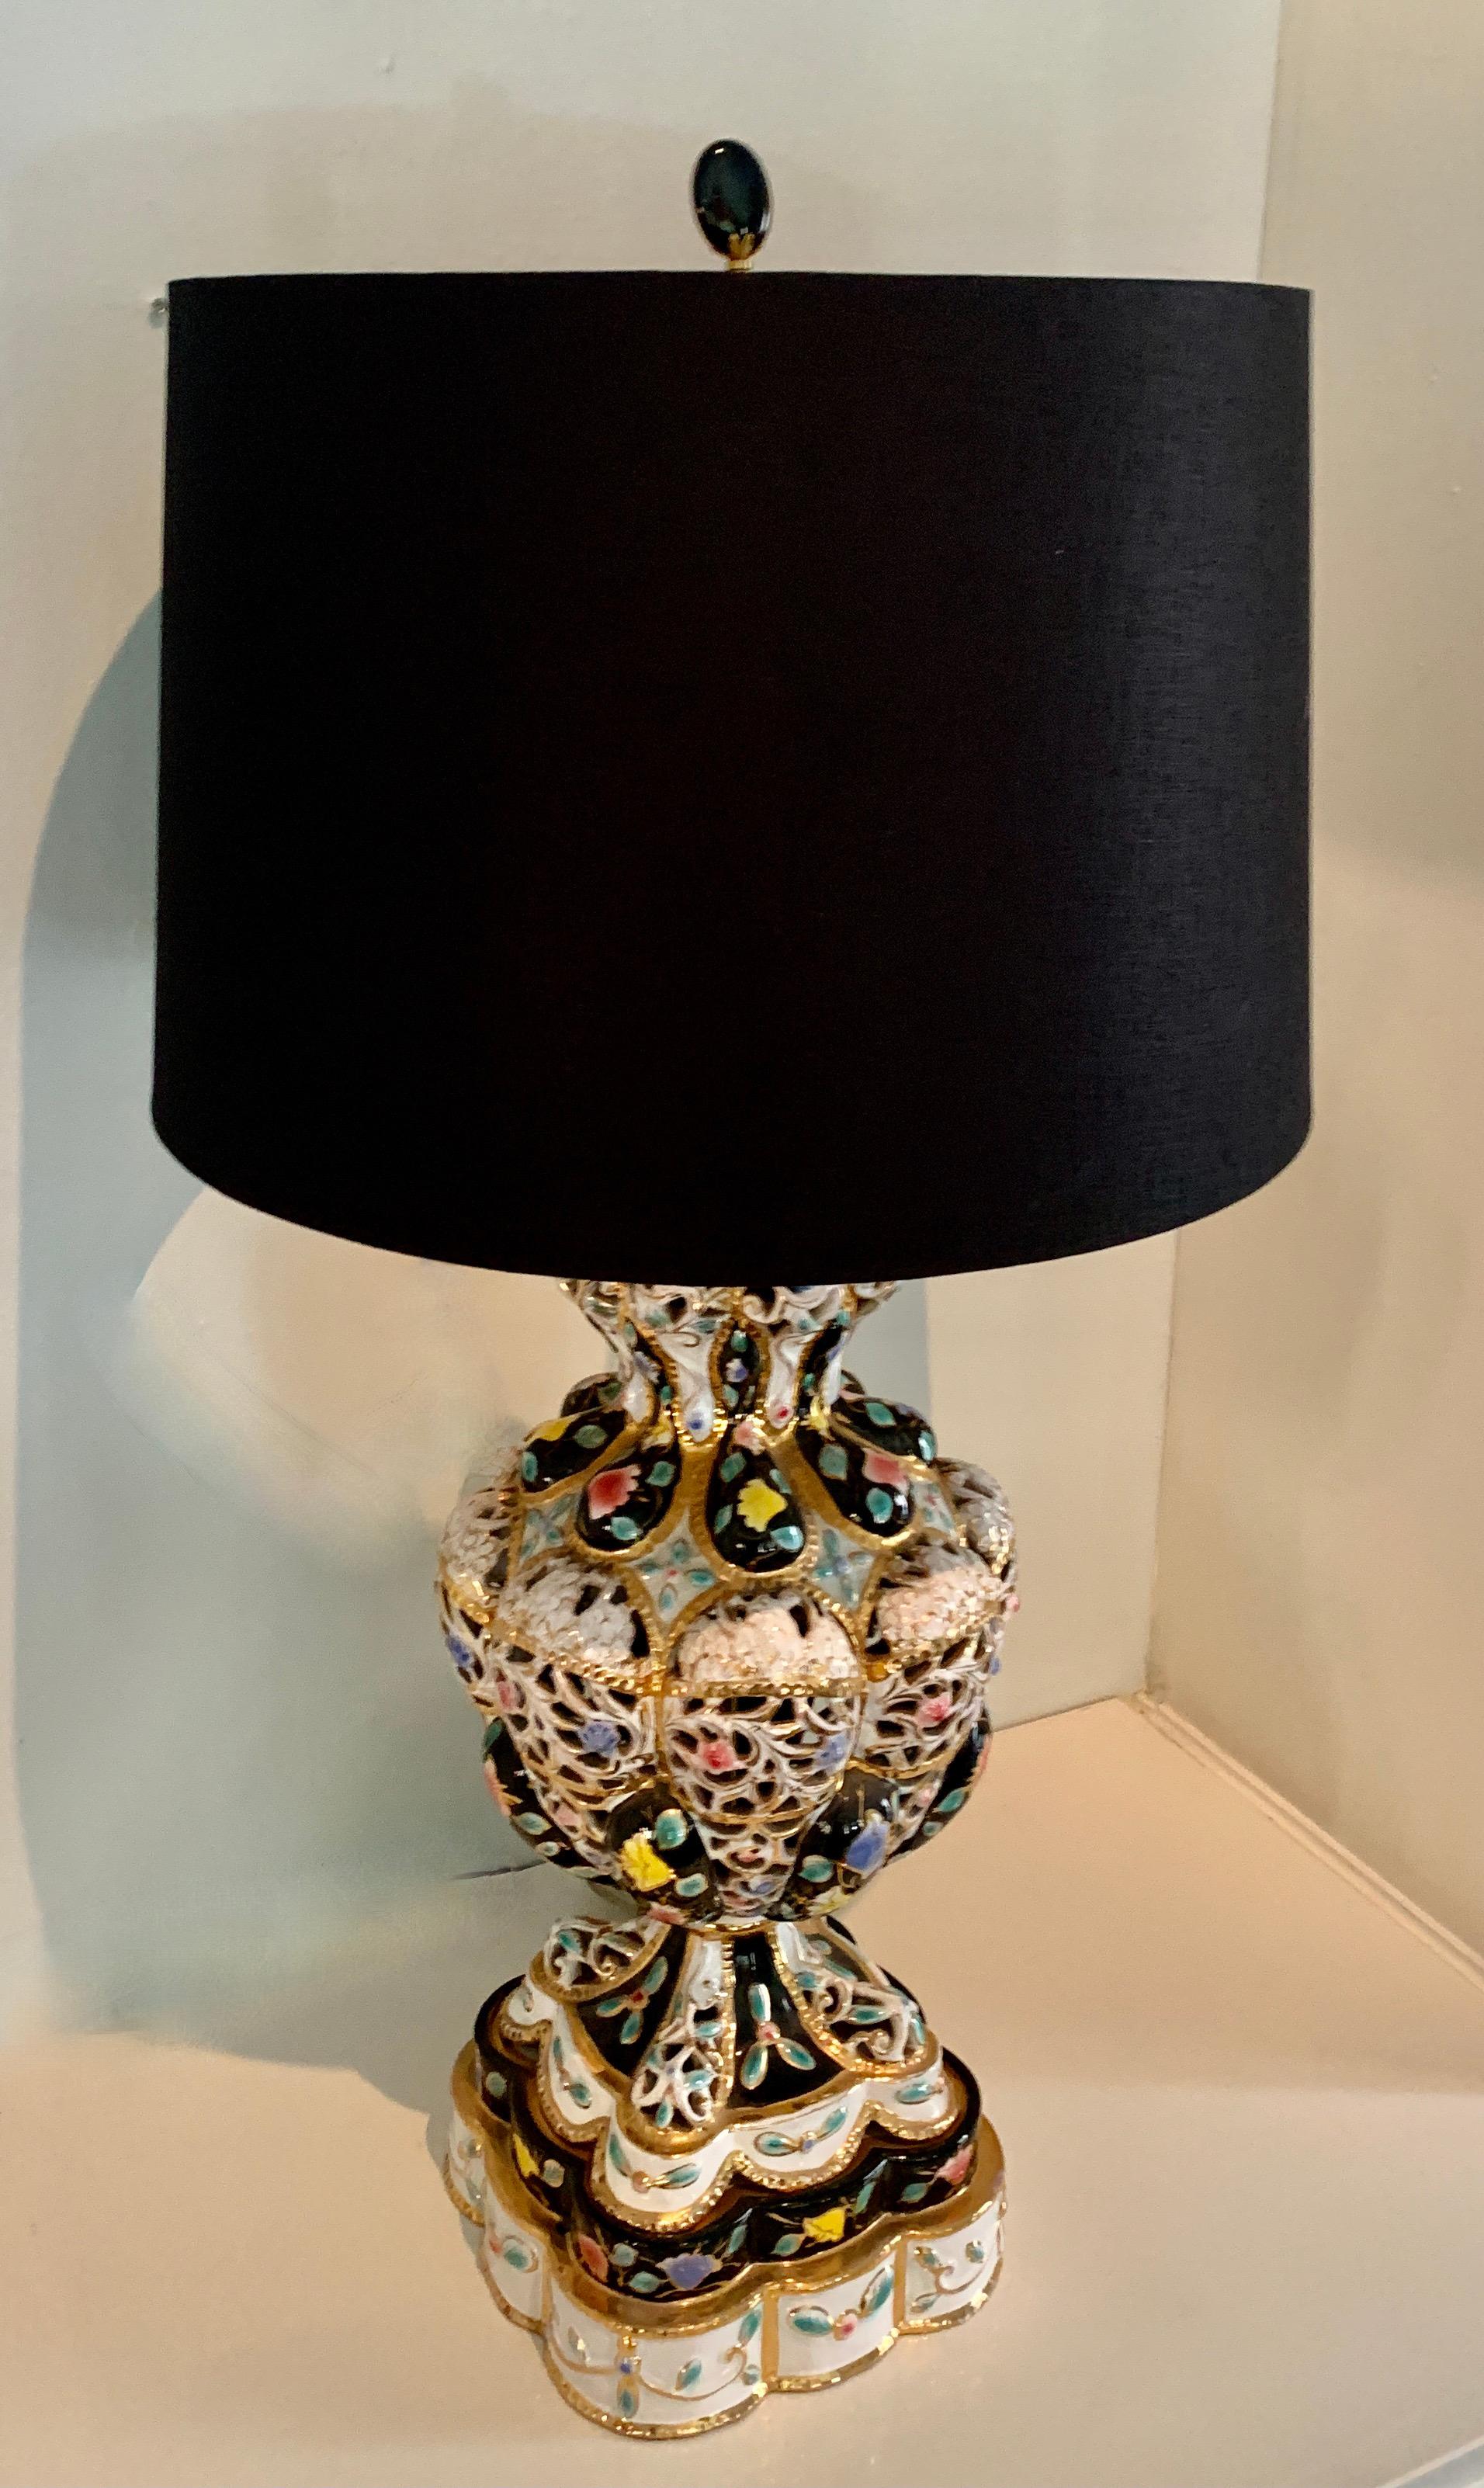 A wonderfully colorful table lamp in the style of Capodimonte. The lamp is a compliment to any artistic decor - so gaudy it's a classic piece of art. The lamp comes with a silk shade with gold foil interior.

*Measurements in description of this